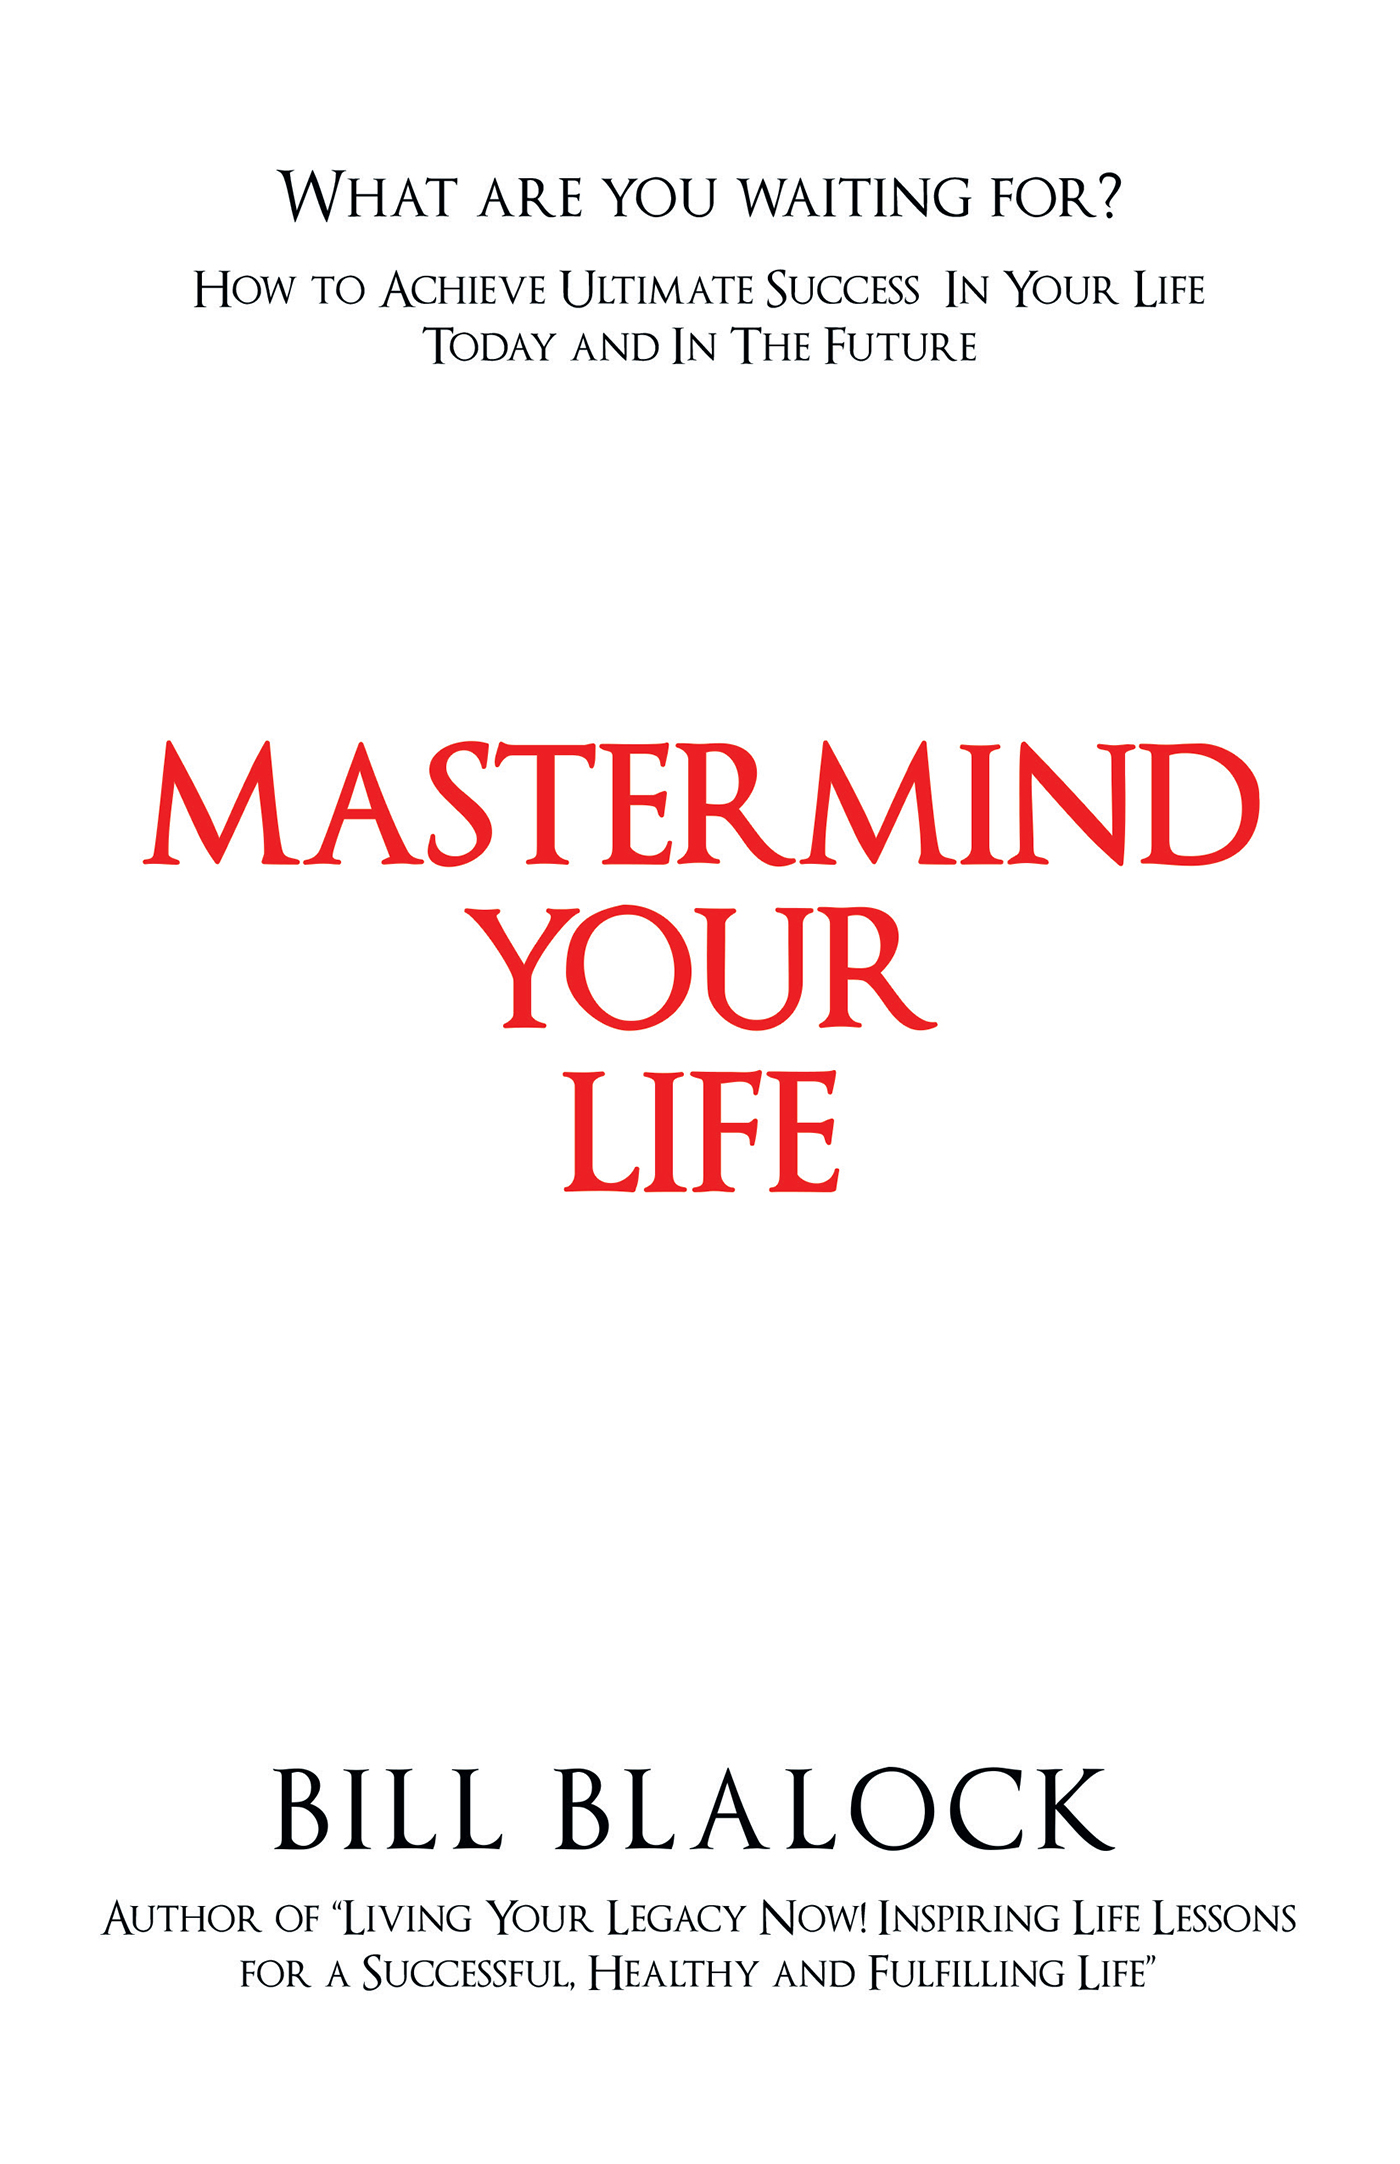 Mastermind Your Life Book Cover